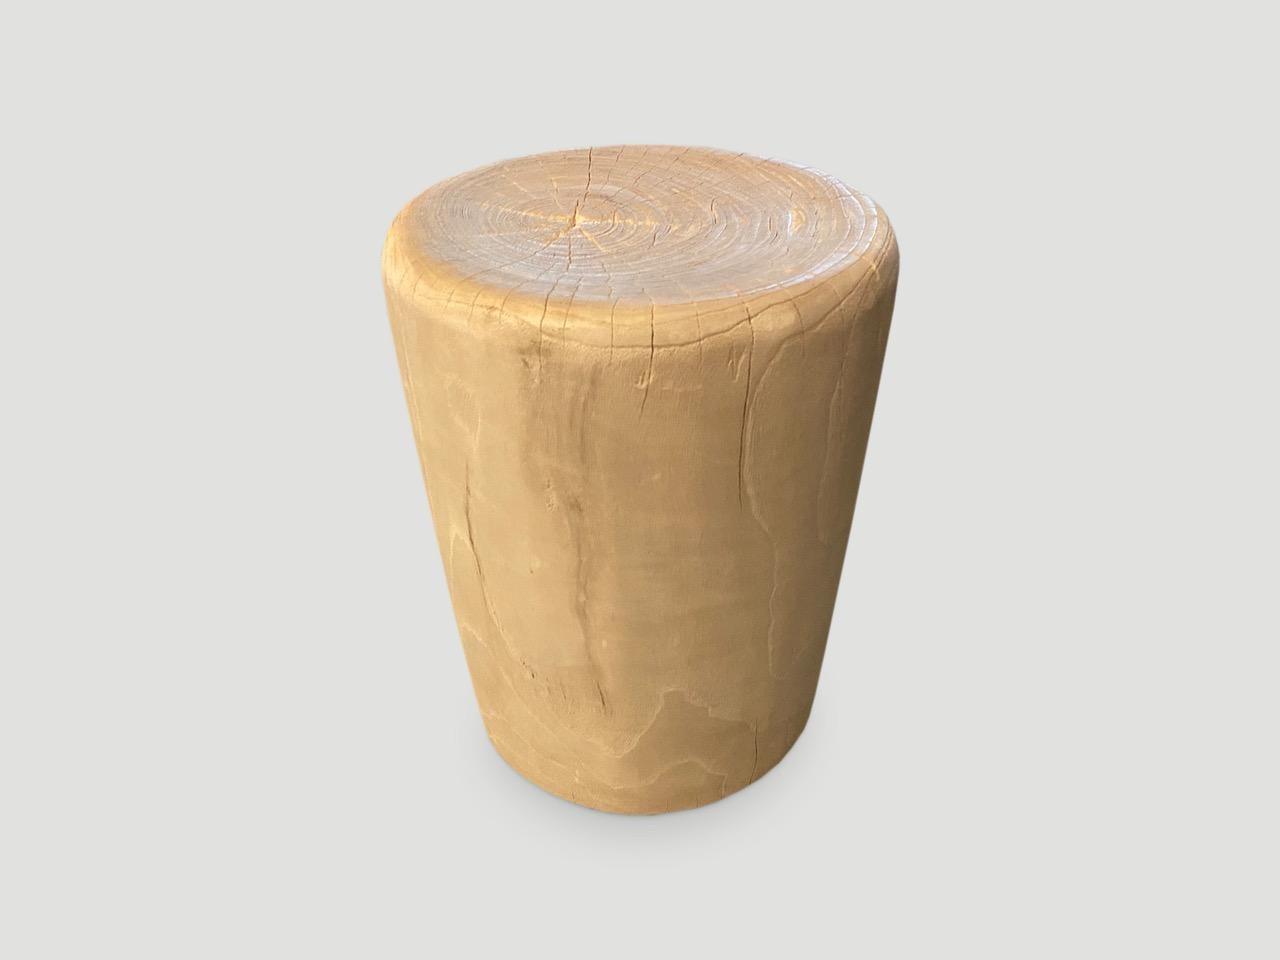 Andrianna Shamaris Bleached Teak Wood Side Table or Stool In Excellent Condition For Sale In New York, NY